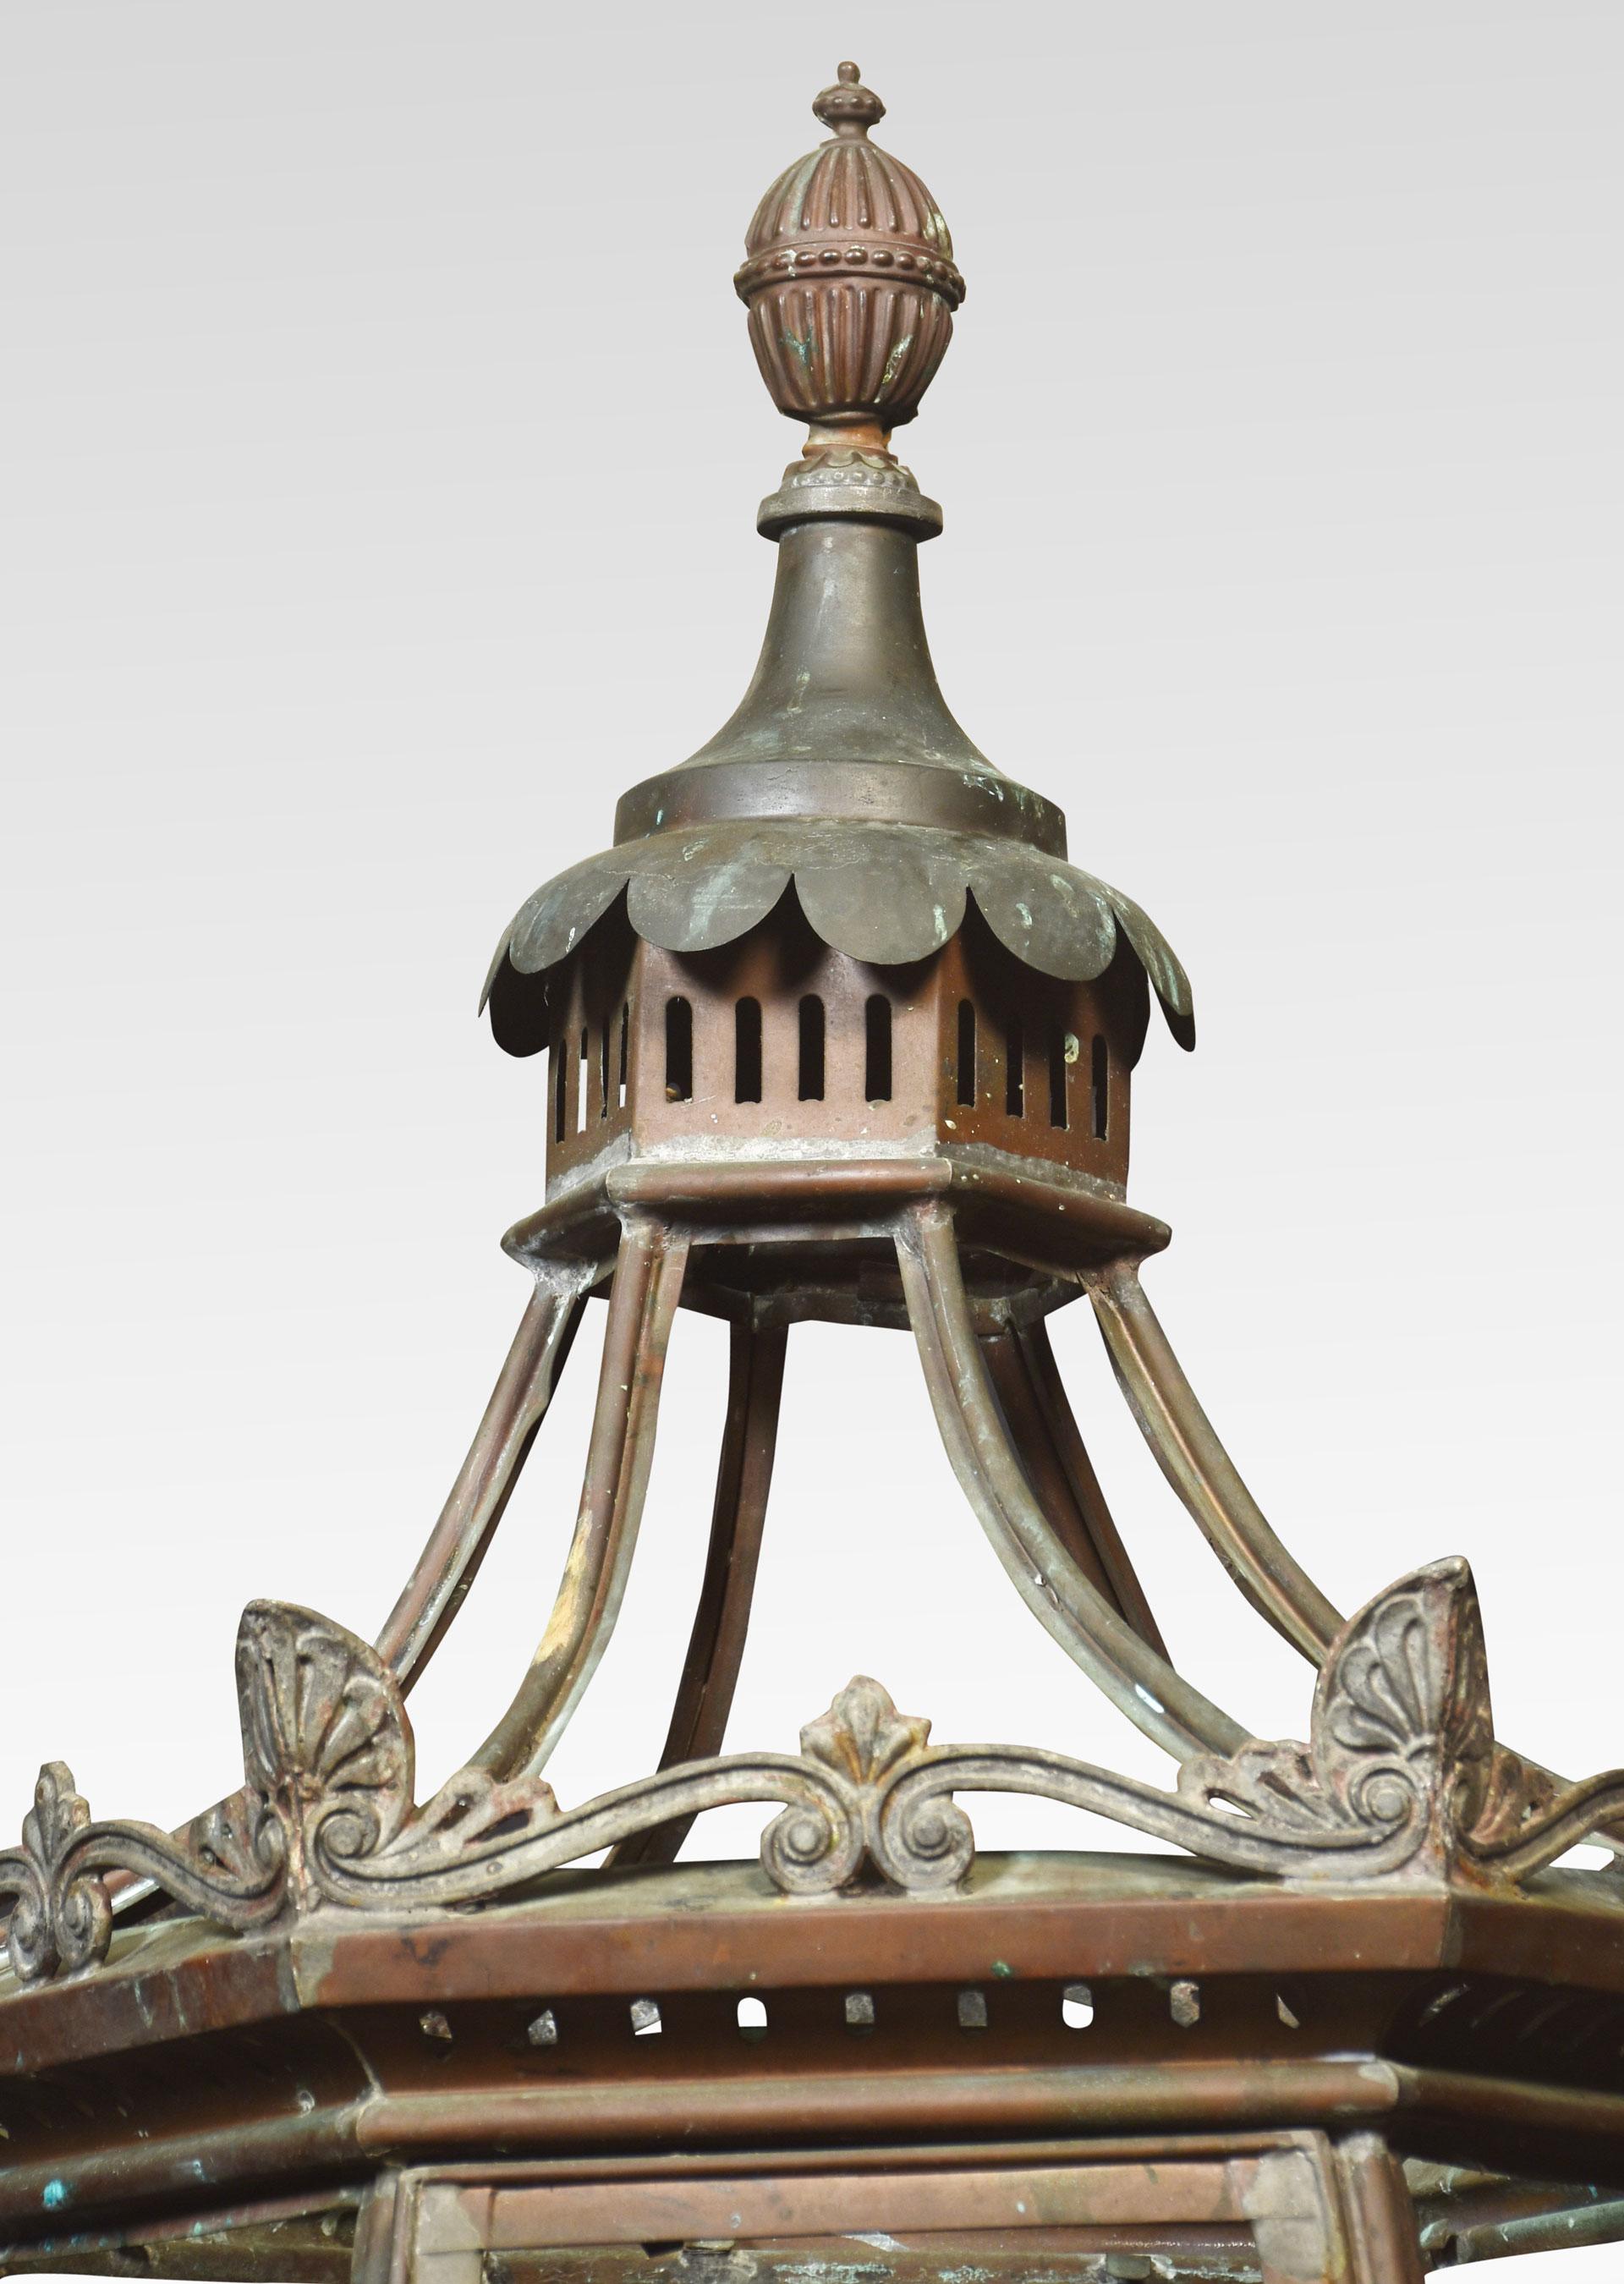 19th-century lamp post lantern, having a shaped finial to the copper lantern frame with a long door. Raised up on cast-iron scrolling base.
Dimensions
Height 55 Inches
Width 23 Inches
Depth 23 Inches